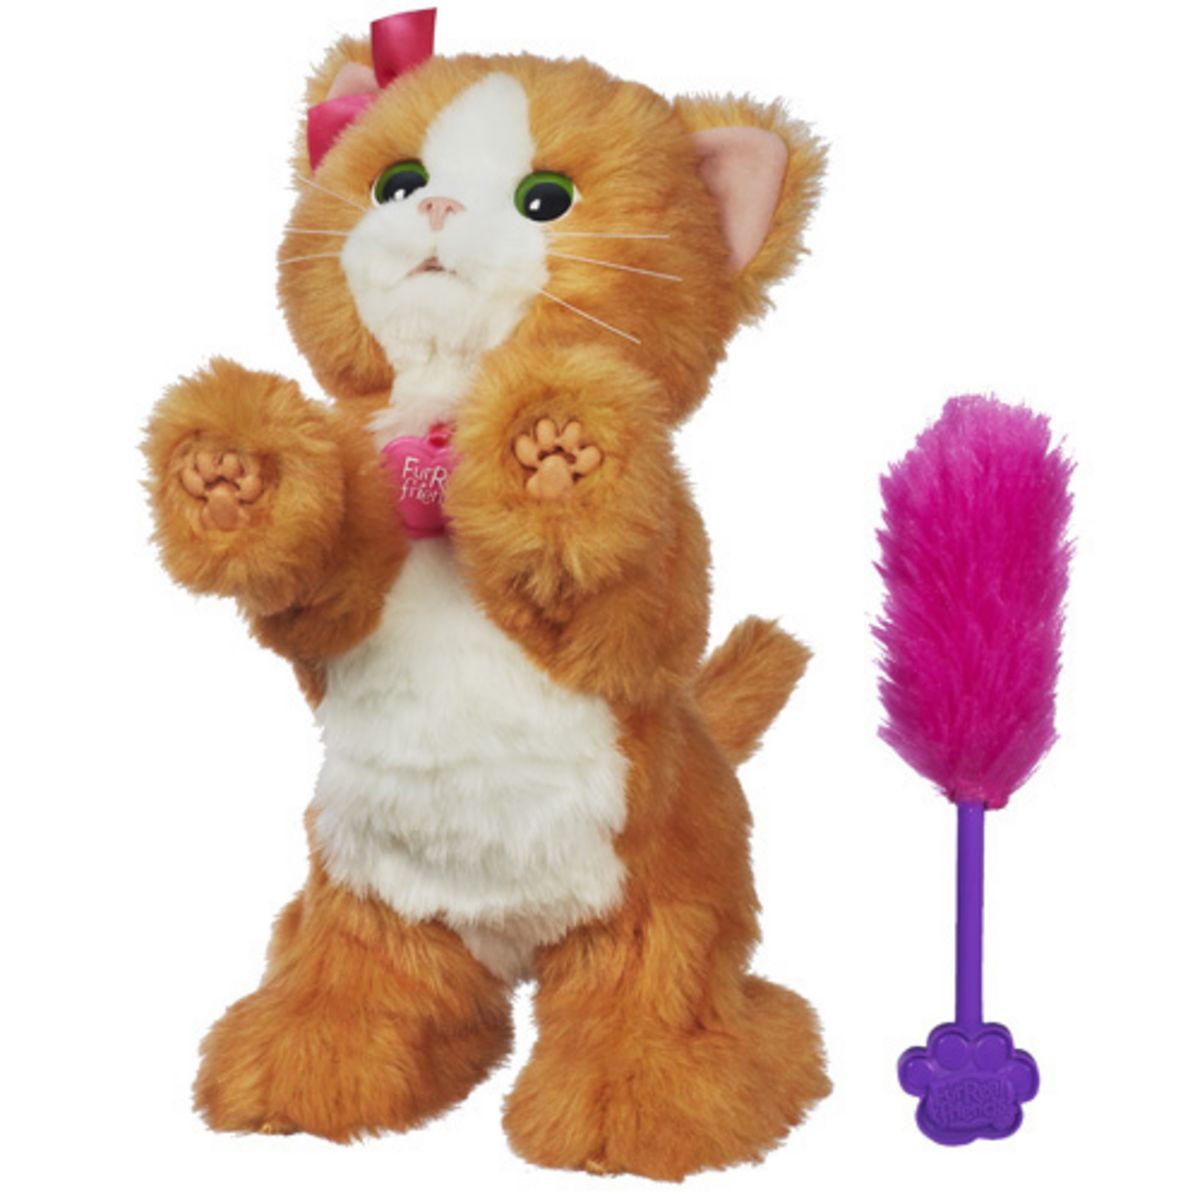 Peluche interactive Daisy mon chat joueur - Furreal Friends Hasbro : King  Jouet, Peluches interactives Hasbro - Peluches